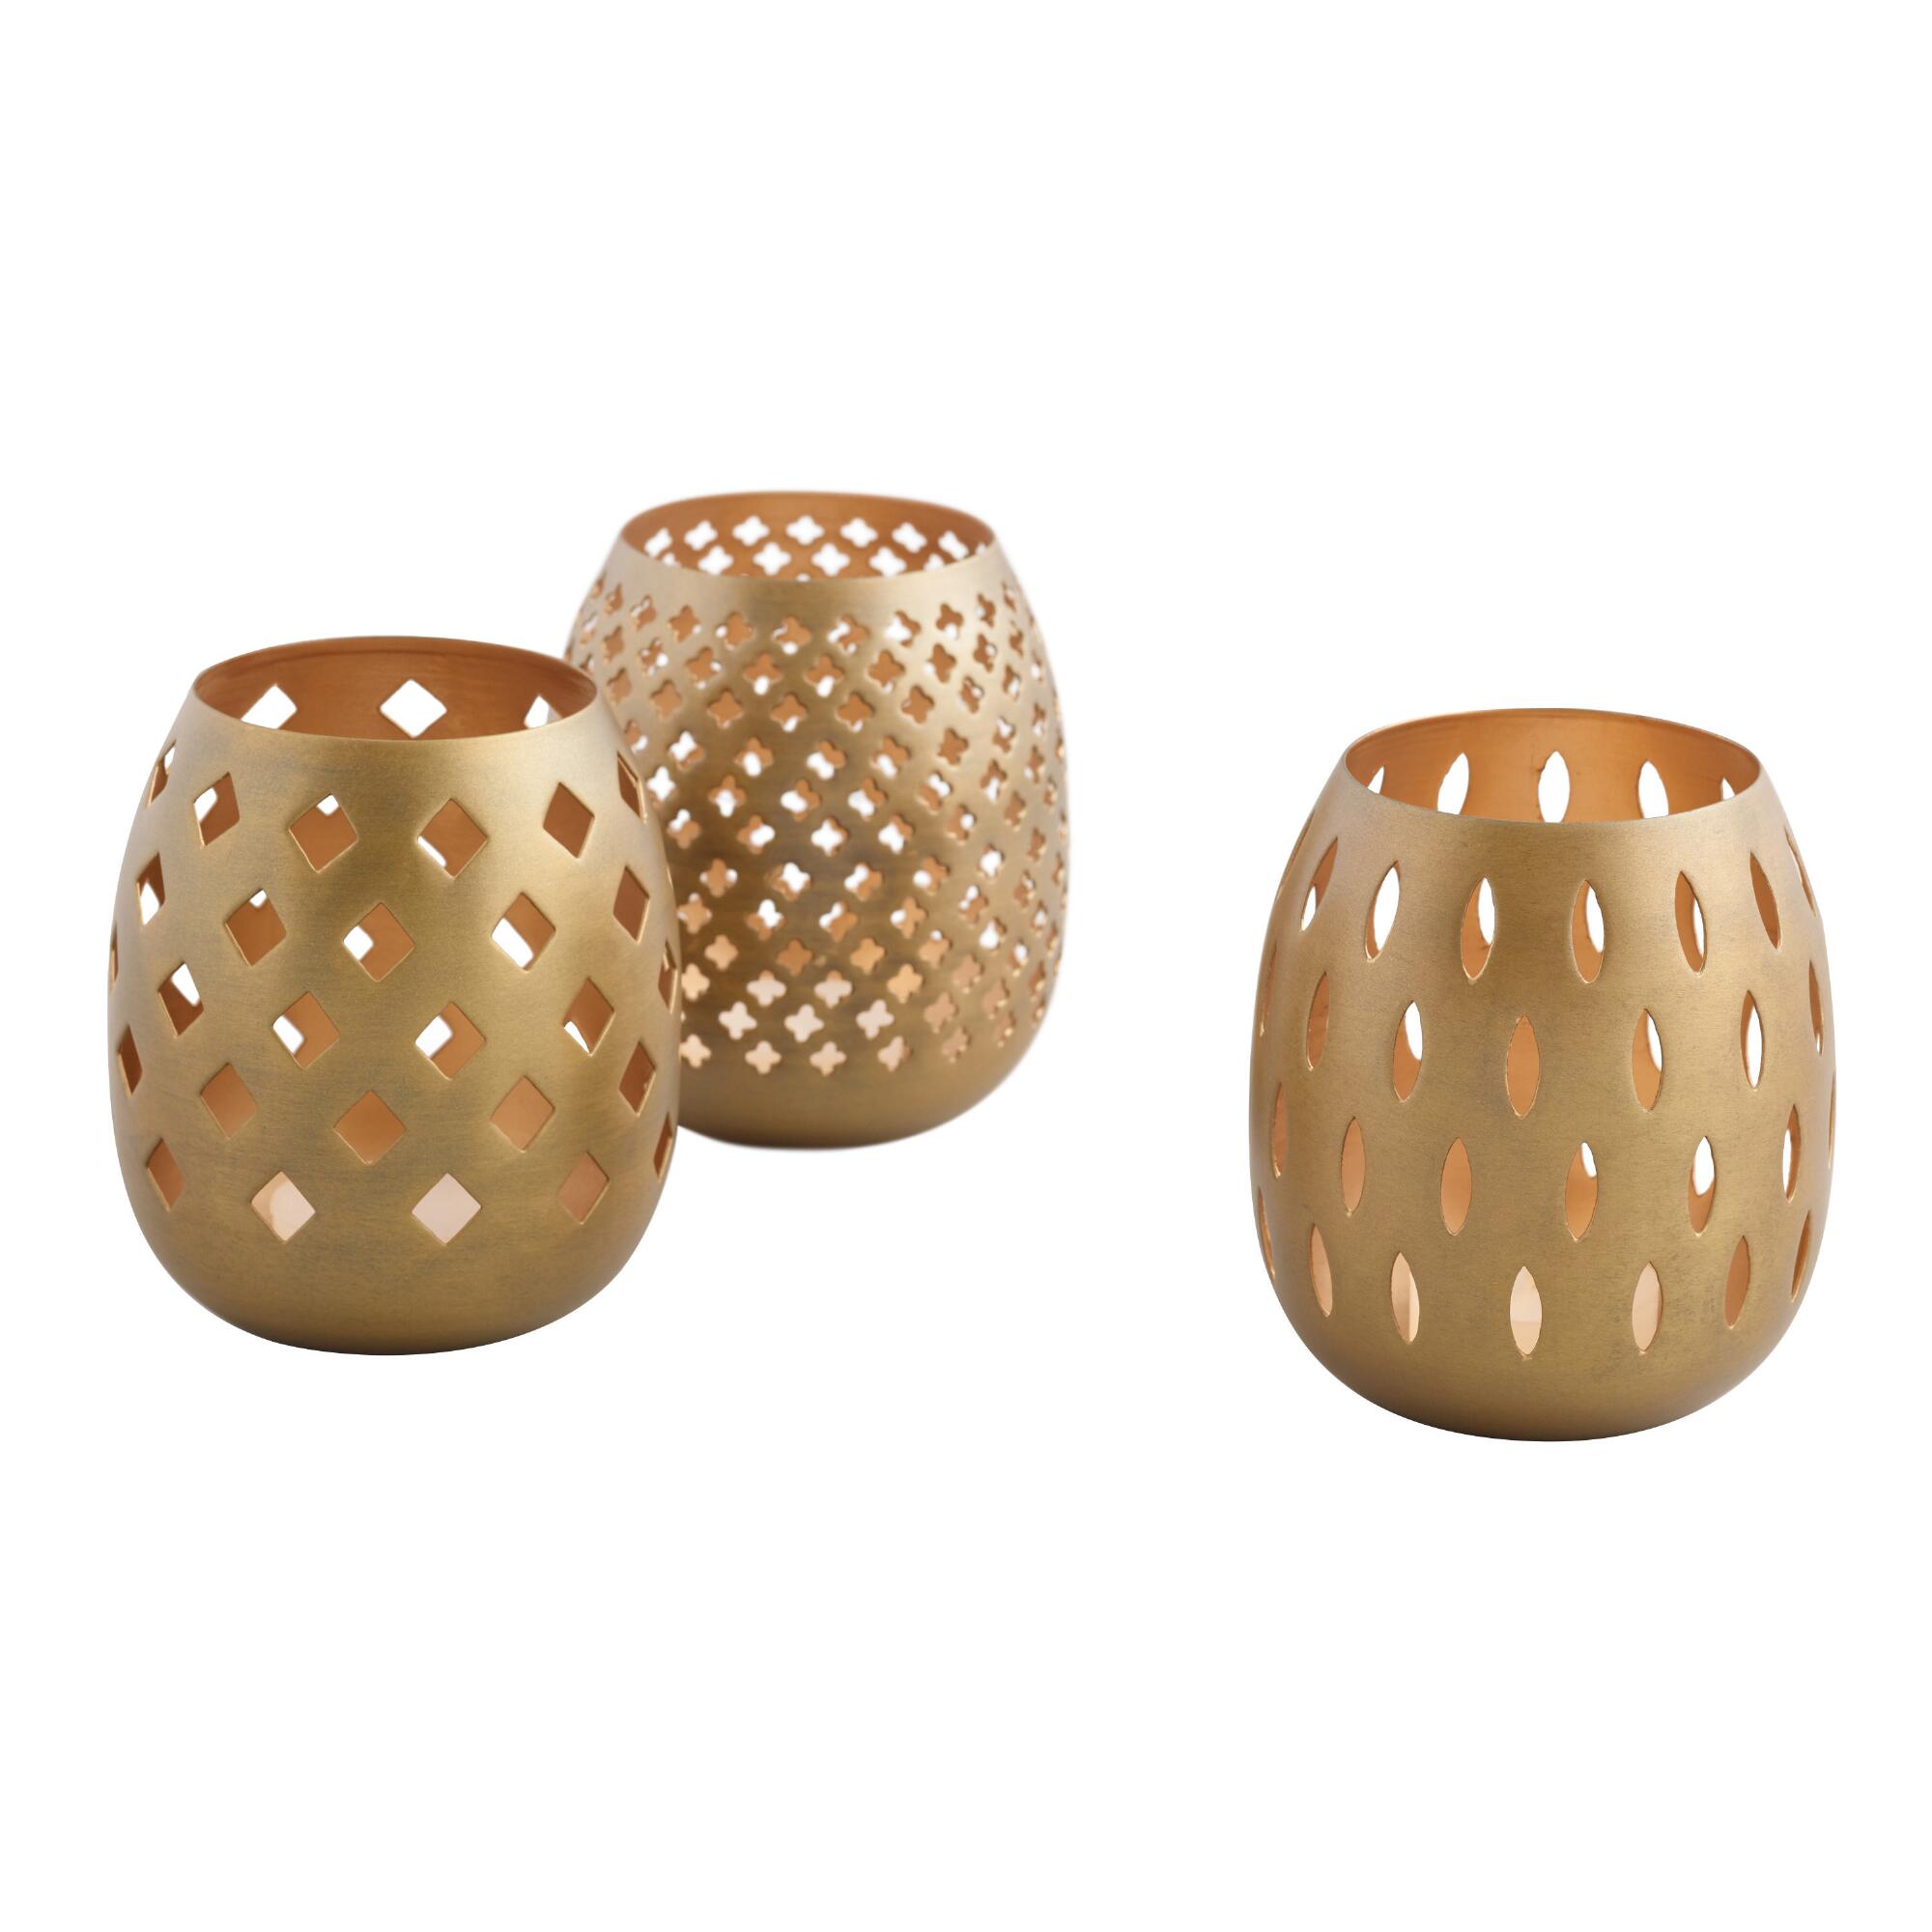 Gold Pierced Tealight Candle Holder Set Of 3 by World Market